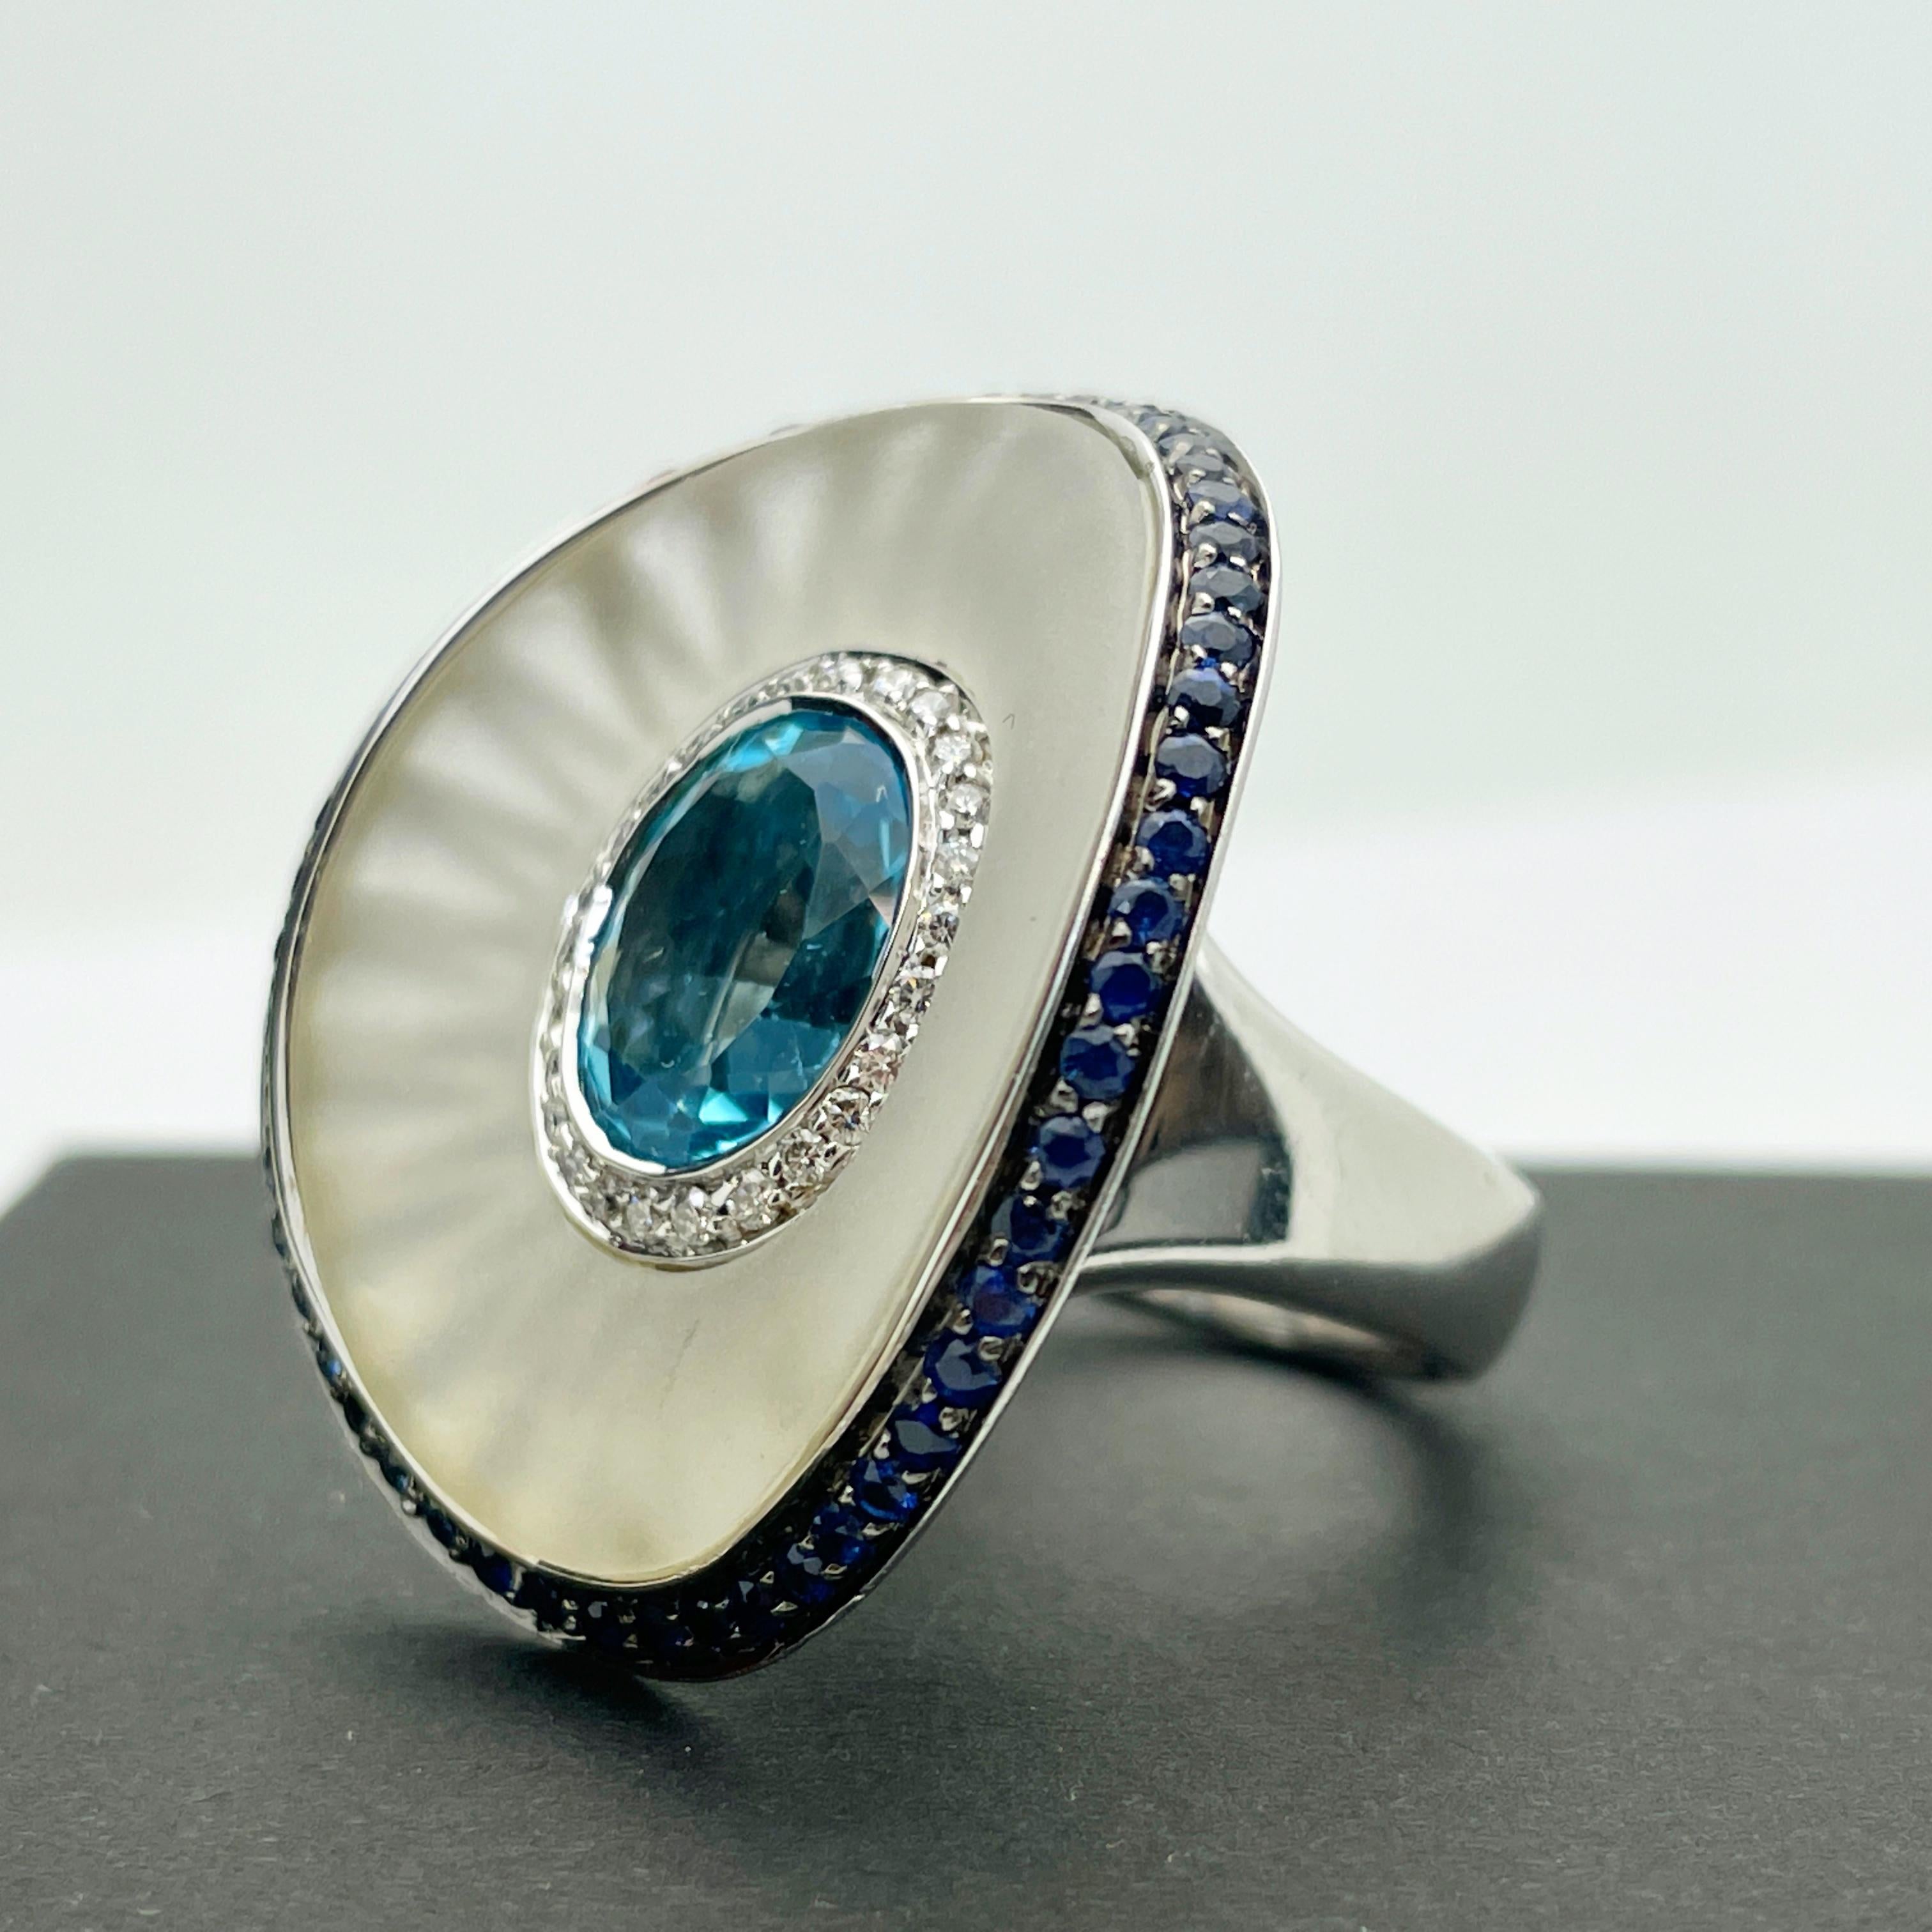 Here is a stunning Italian Custom Made 18k Large White Gold Custom Made Blue Topaz, Diamond, Rock Crystal and Sapphire Ring.

This heavy and substantial ring features a 6.00ct oval cut blue topaz measuring approx. 12.00mm x 10.00mm. The topaz is